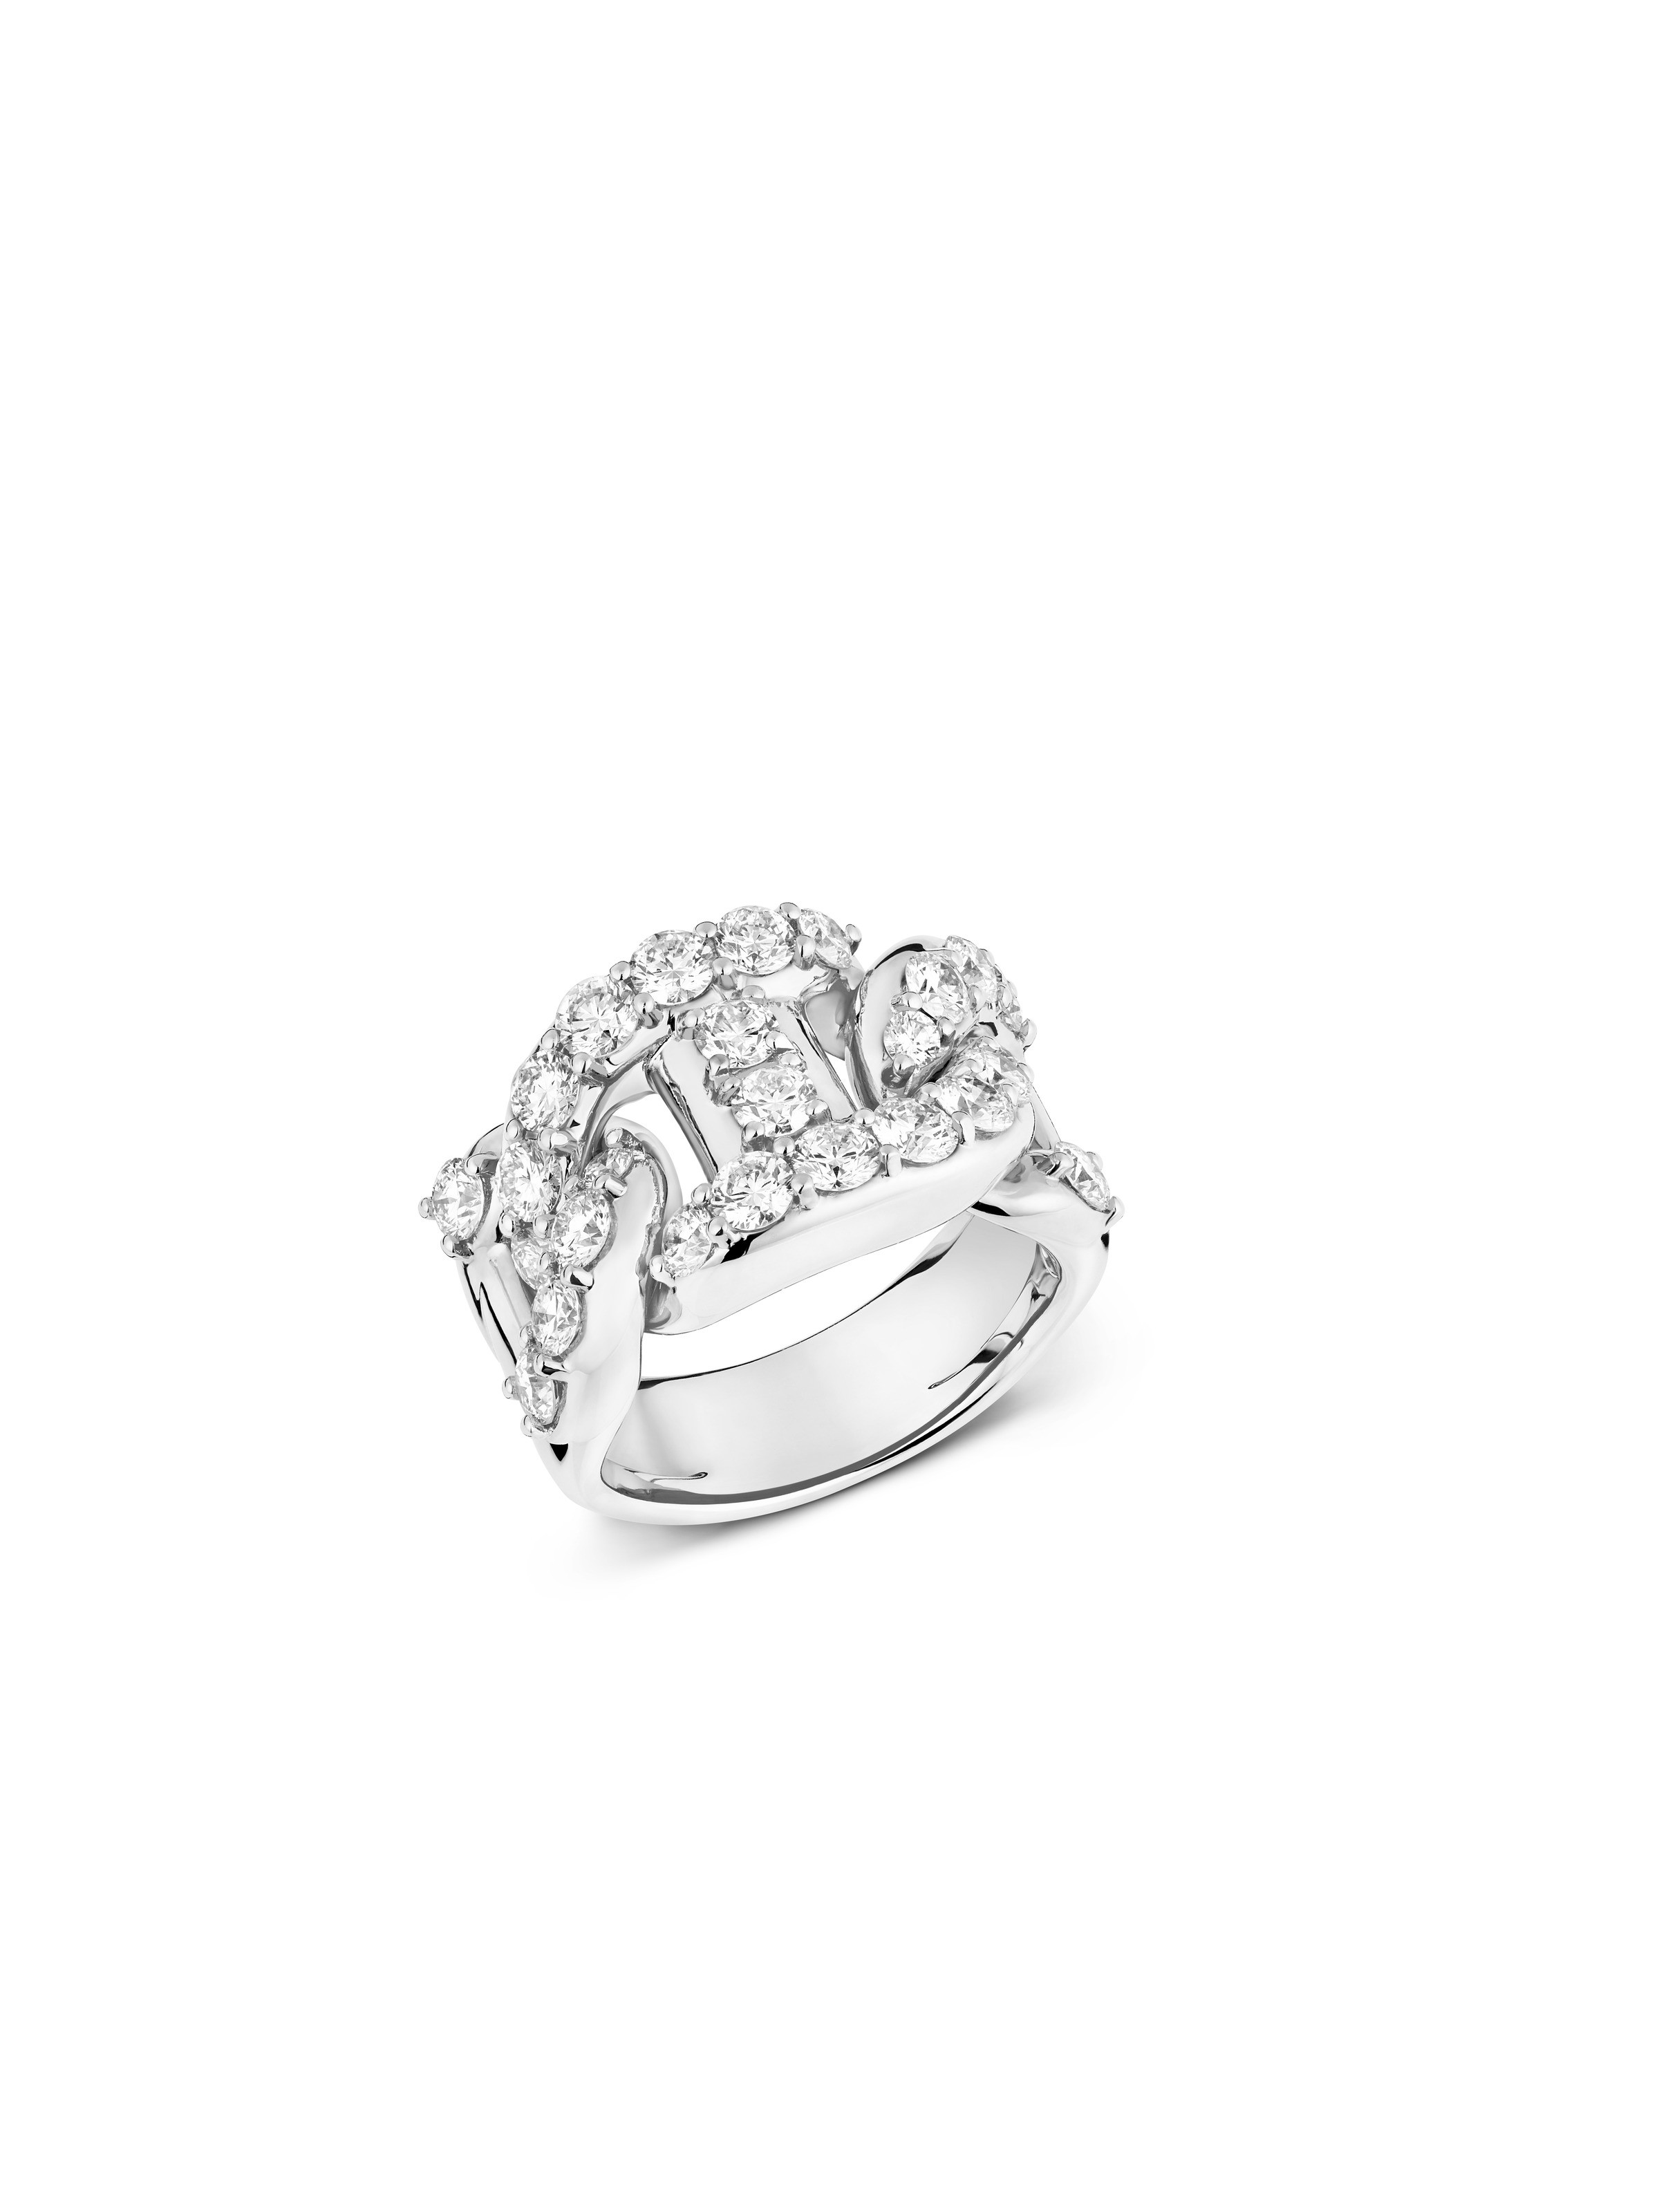 Uptown ring | By Wempe Statements | Wempe Jewelers